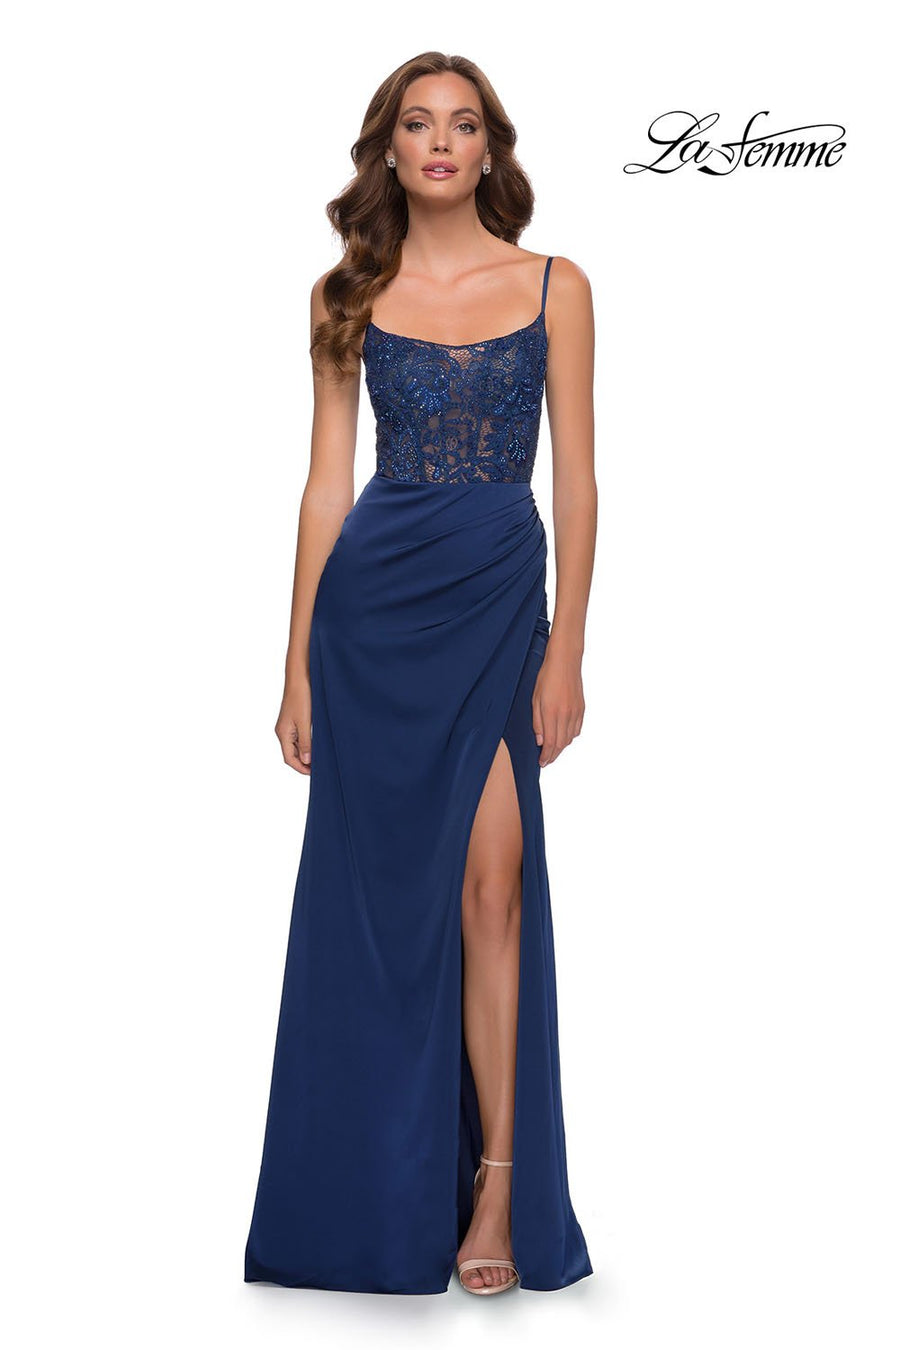 La Femme 29888 prom dress images.  La Femme 29888 is available in these colors: Navy.